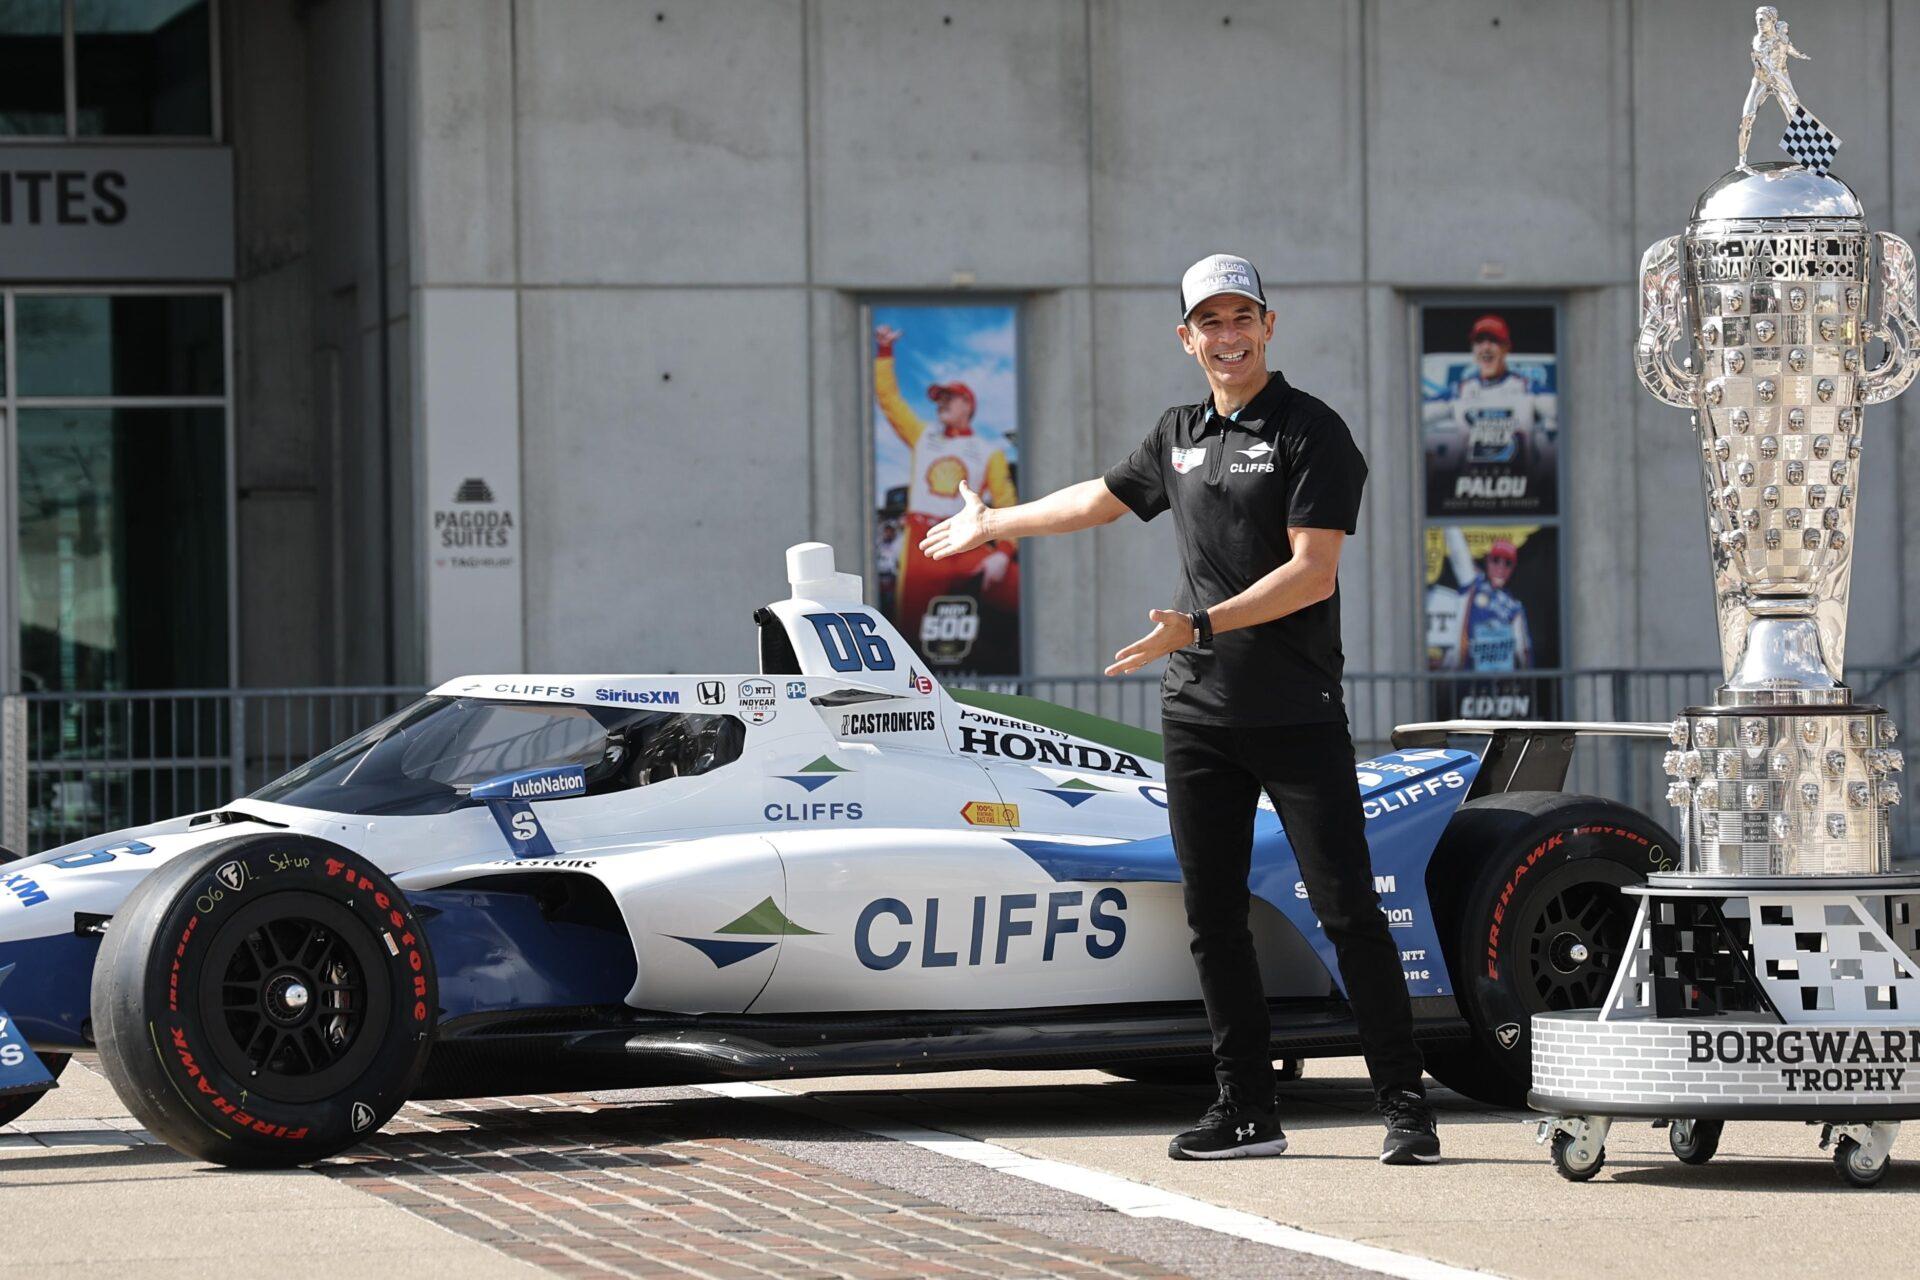 Helio-Castroneves-unveils-Cliffs-livery-for-108th-running-of-the-Indianapolis-500-Photo-by-Chris-Owens_Large-Image-Without-Watermark_m97245